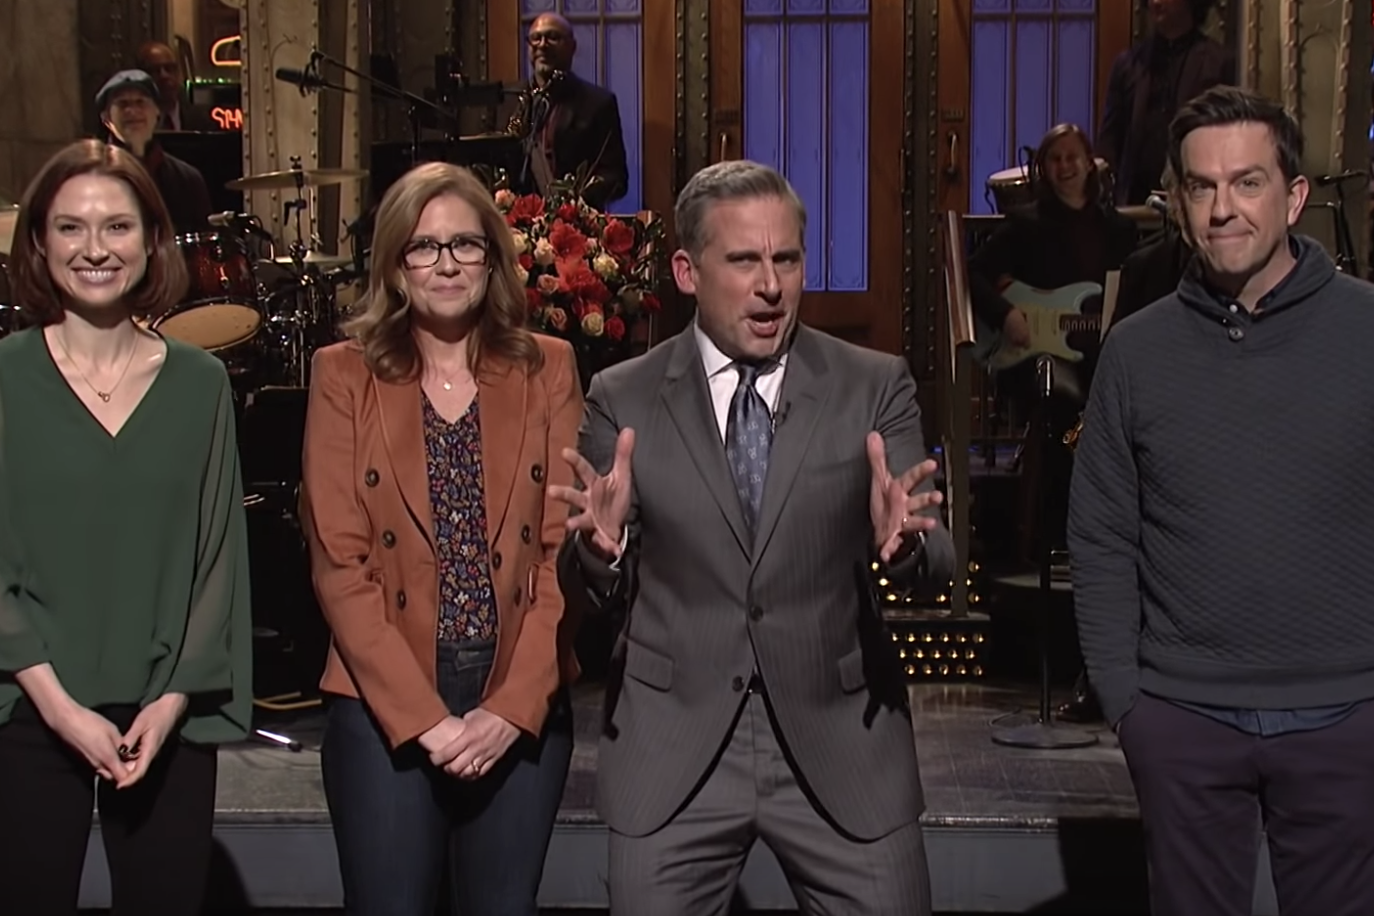 Steve Carell Helps Snl Bounce Back From Season Low With The Office